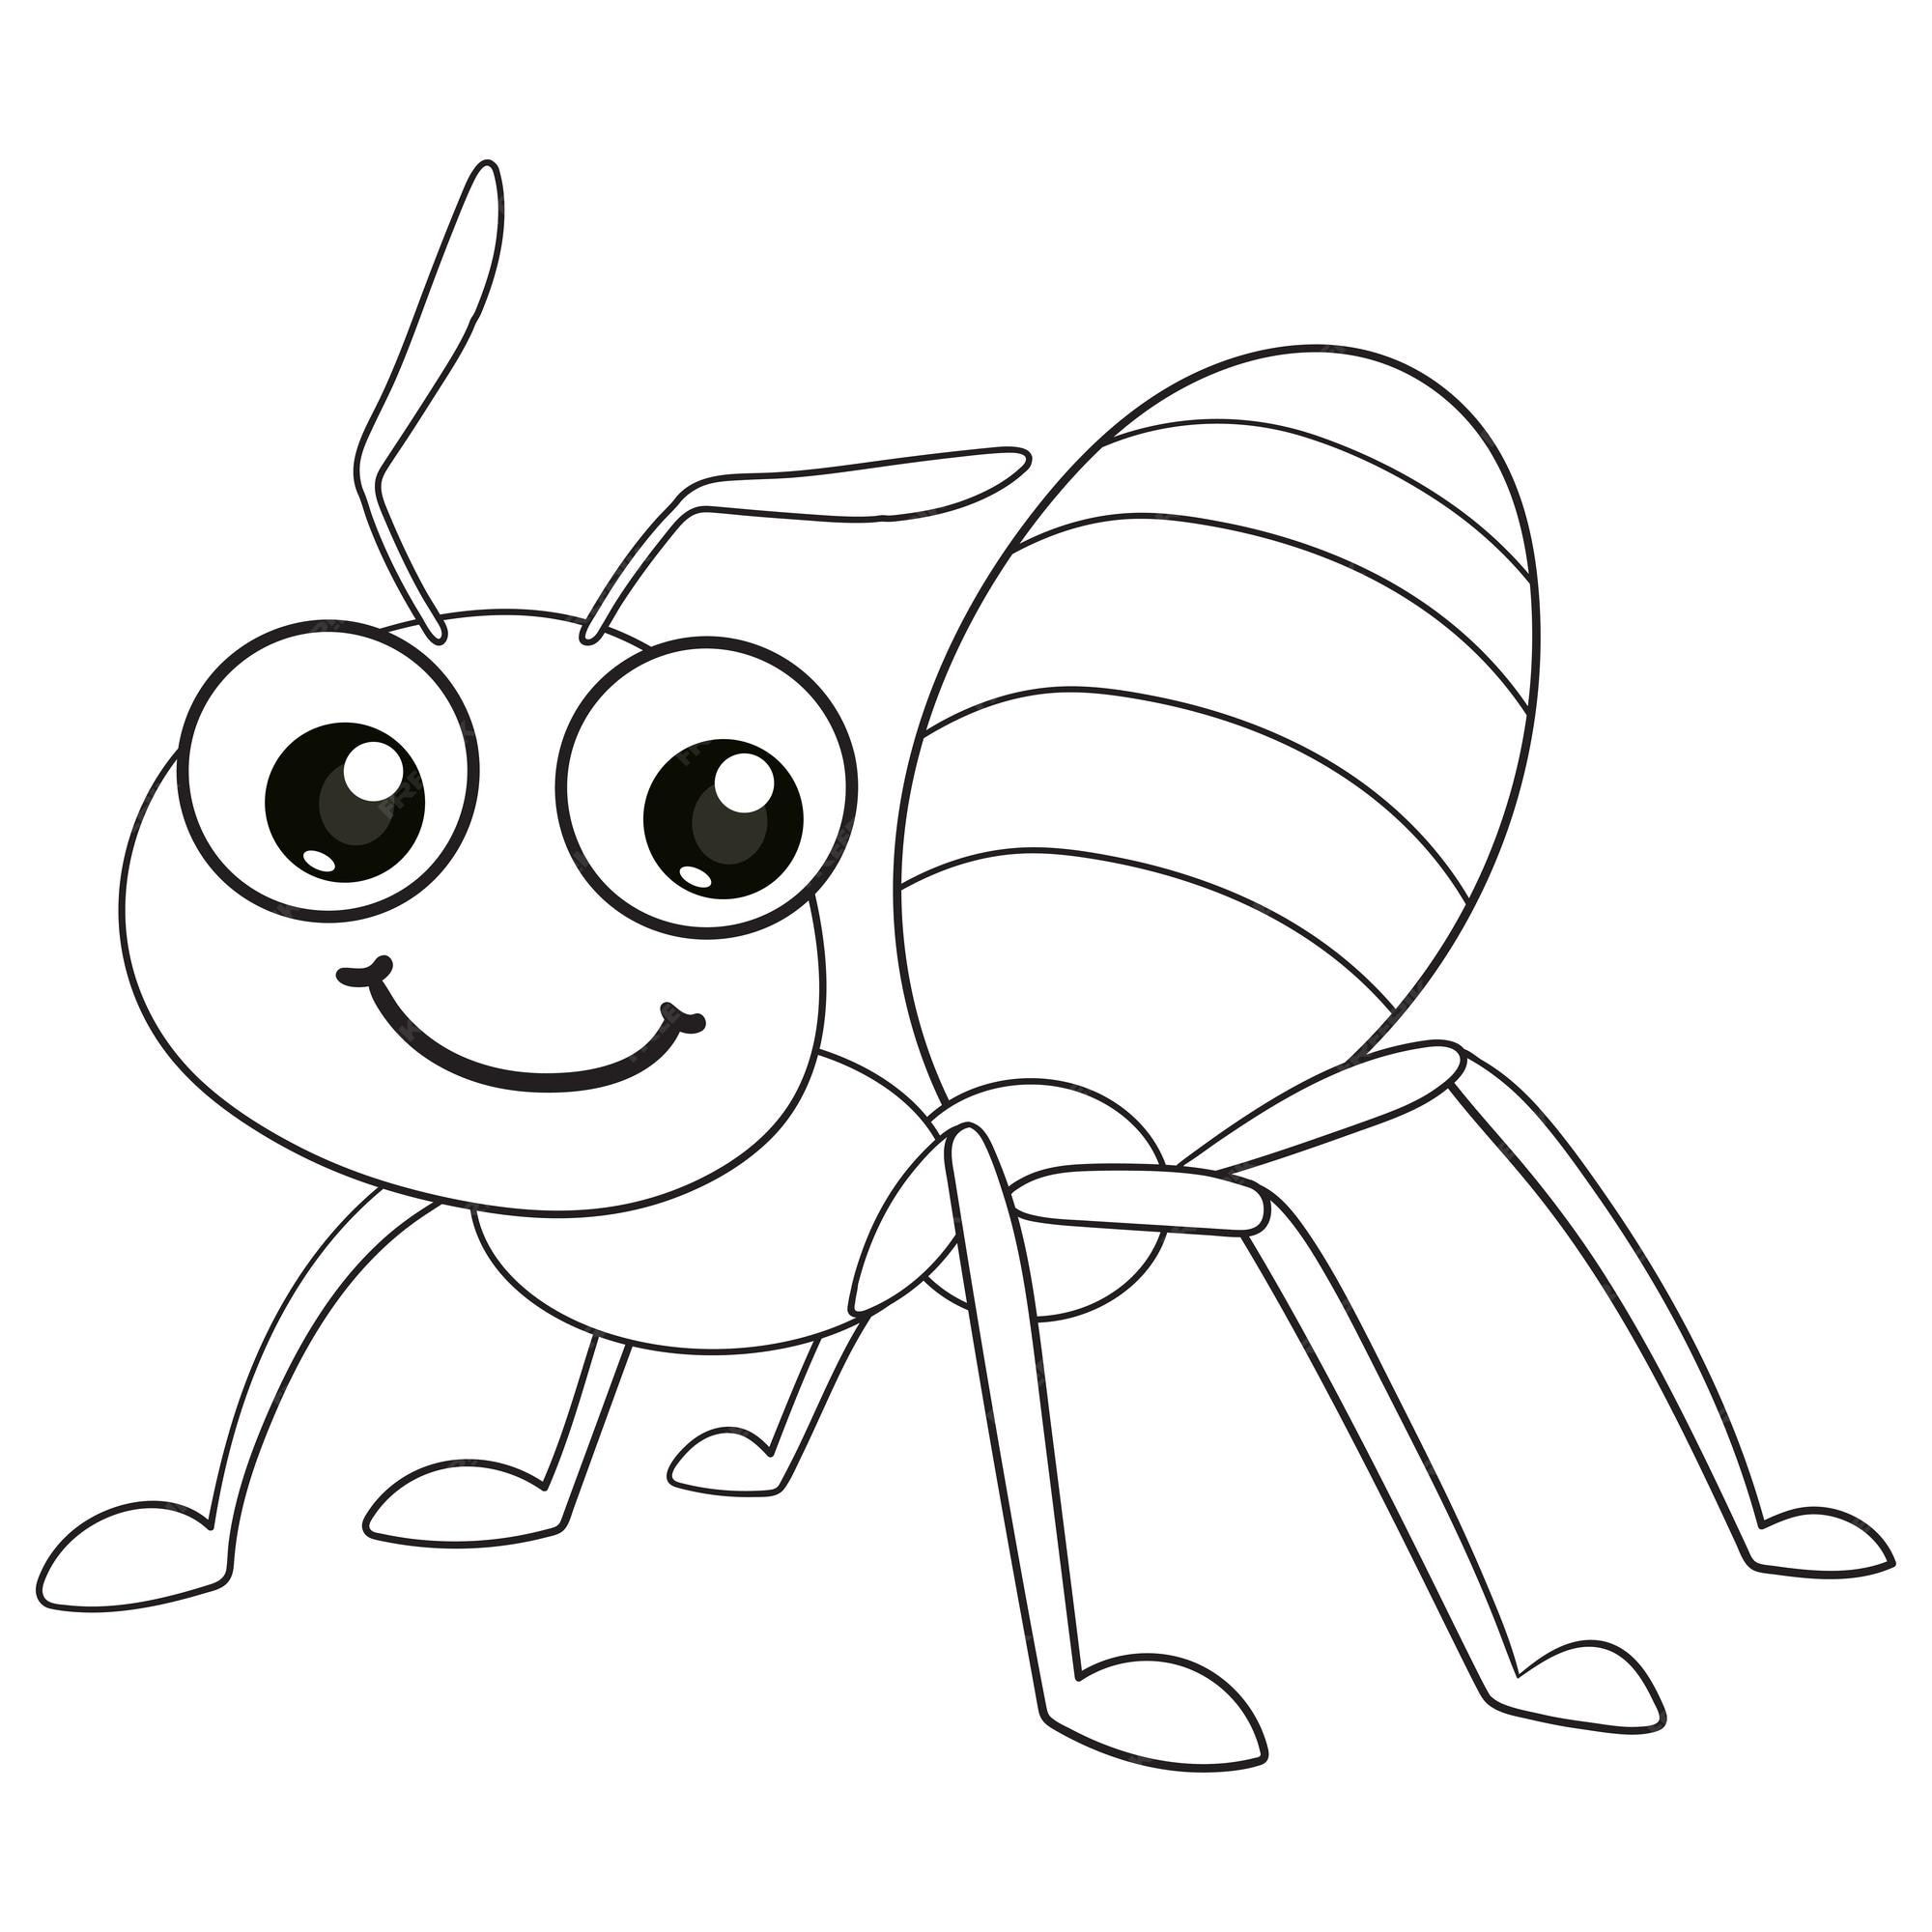 Premium Vector | Coloring pages or books for kids cute ant cartoon black  and white